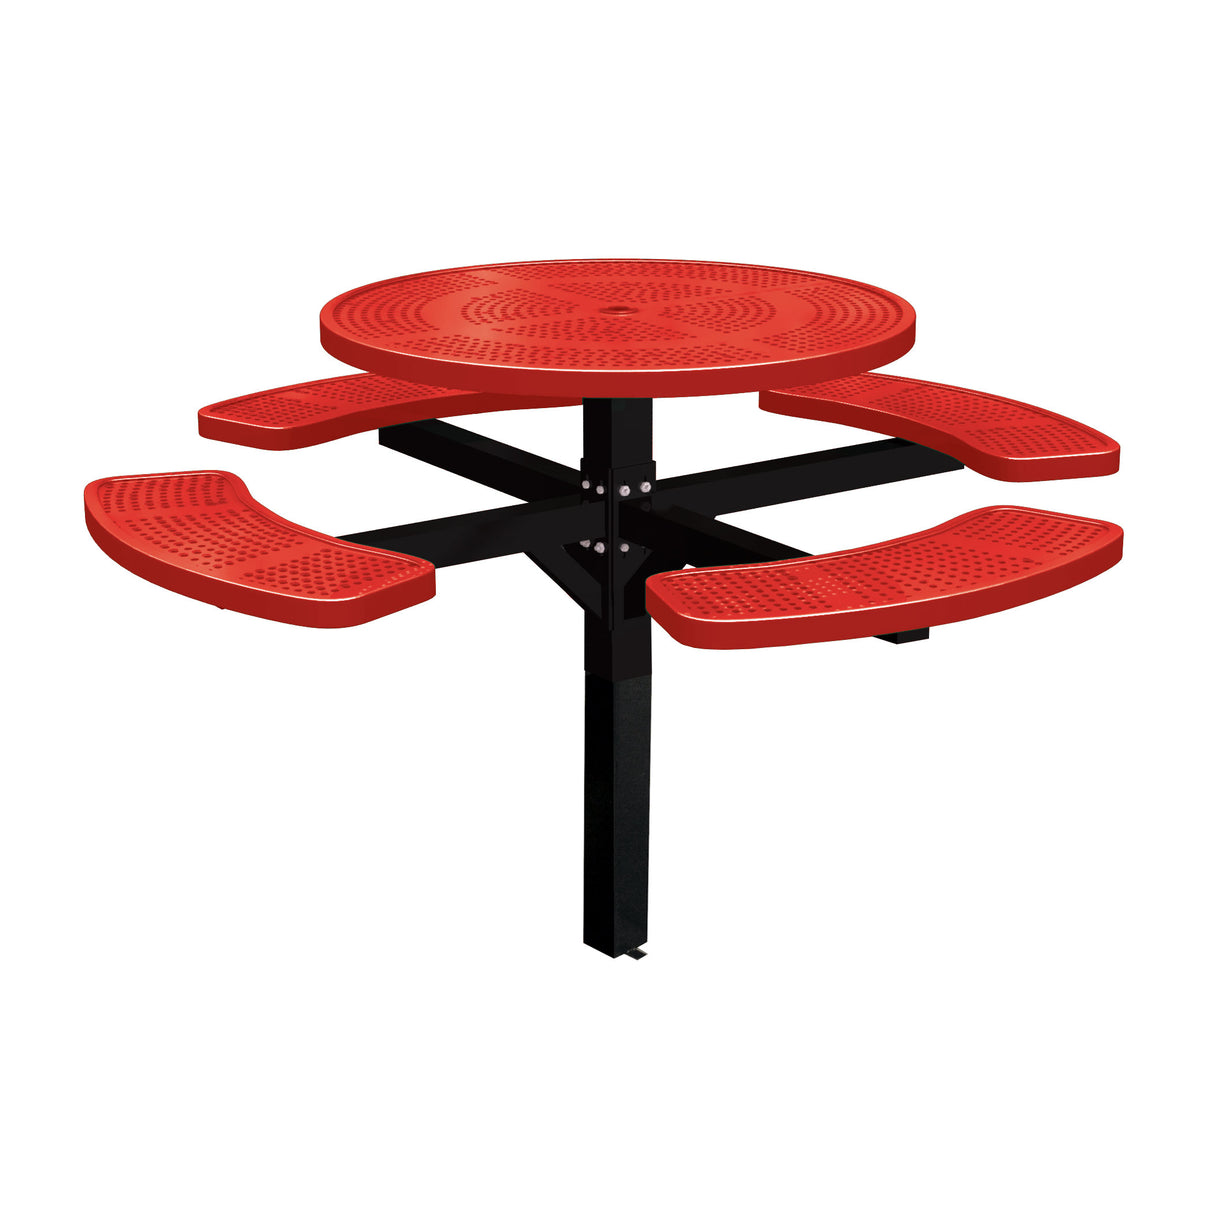 46˝ Single Post Perforated Round Table